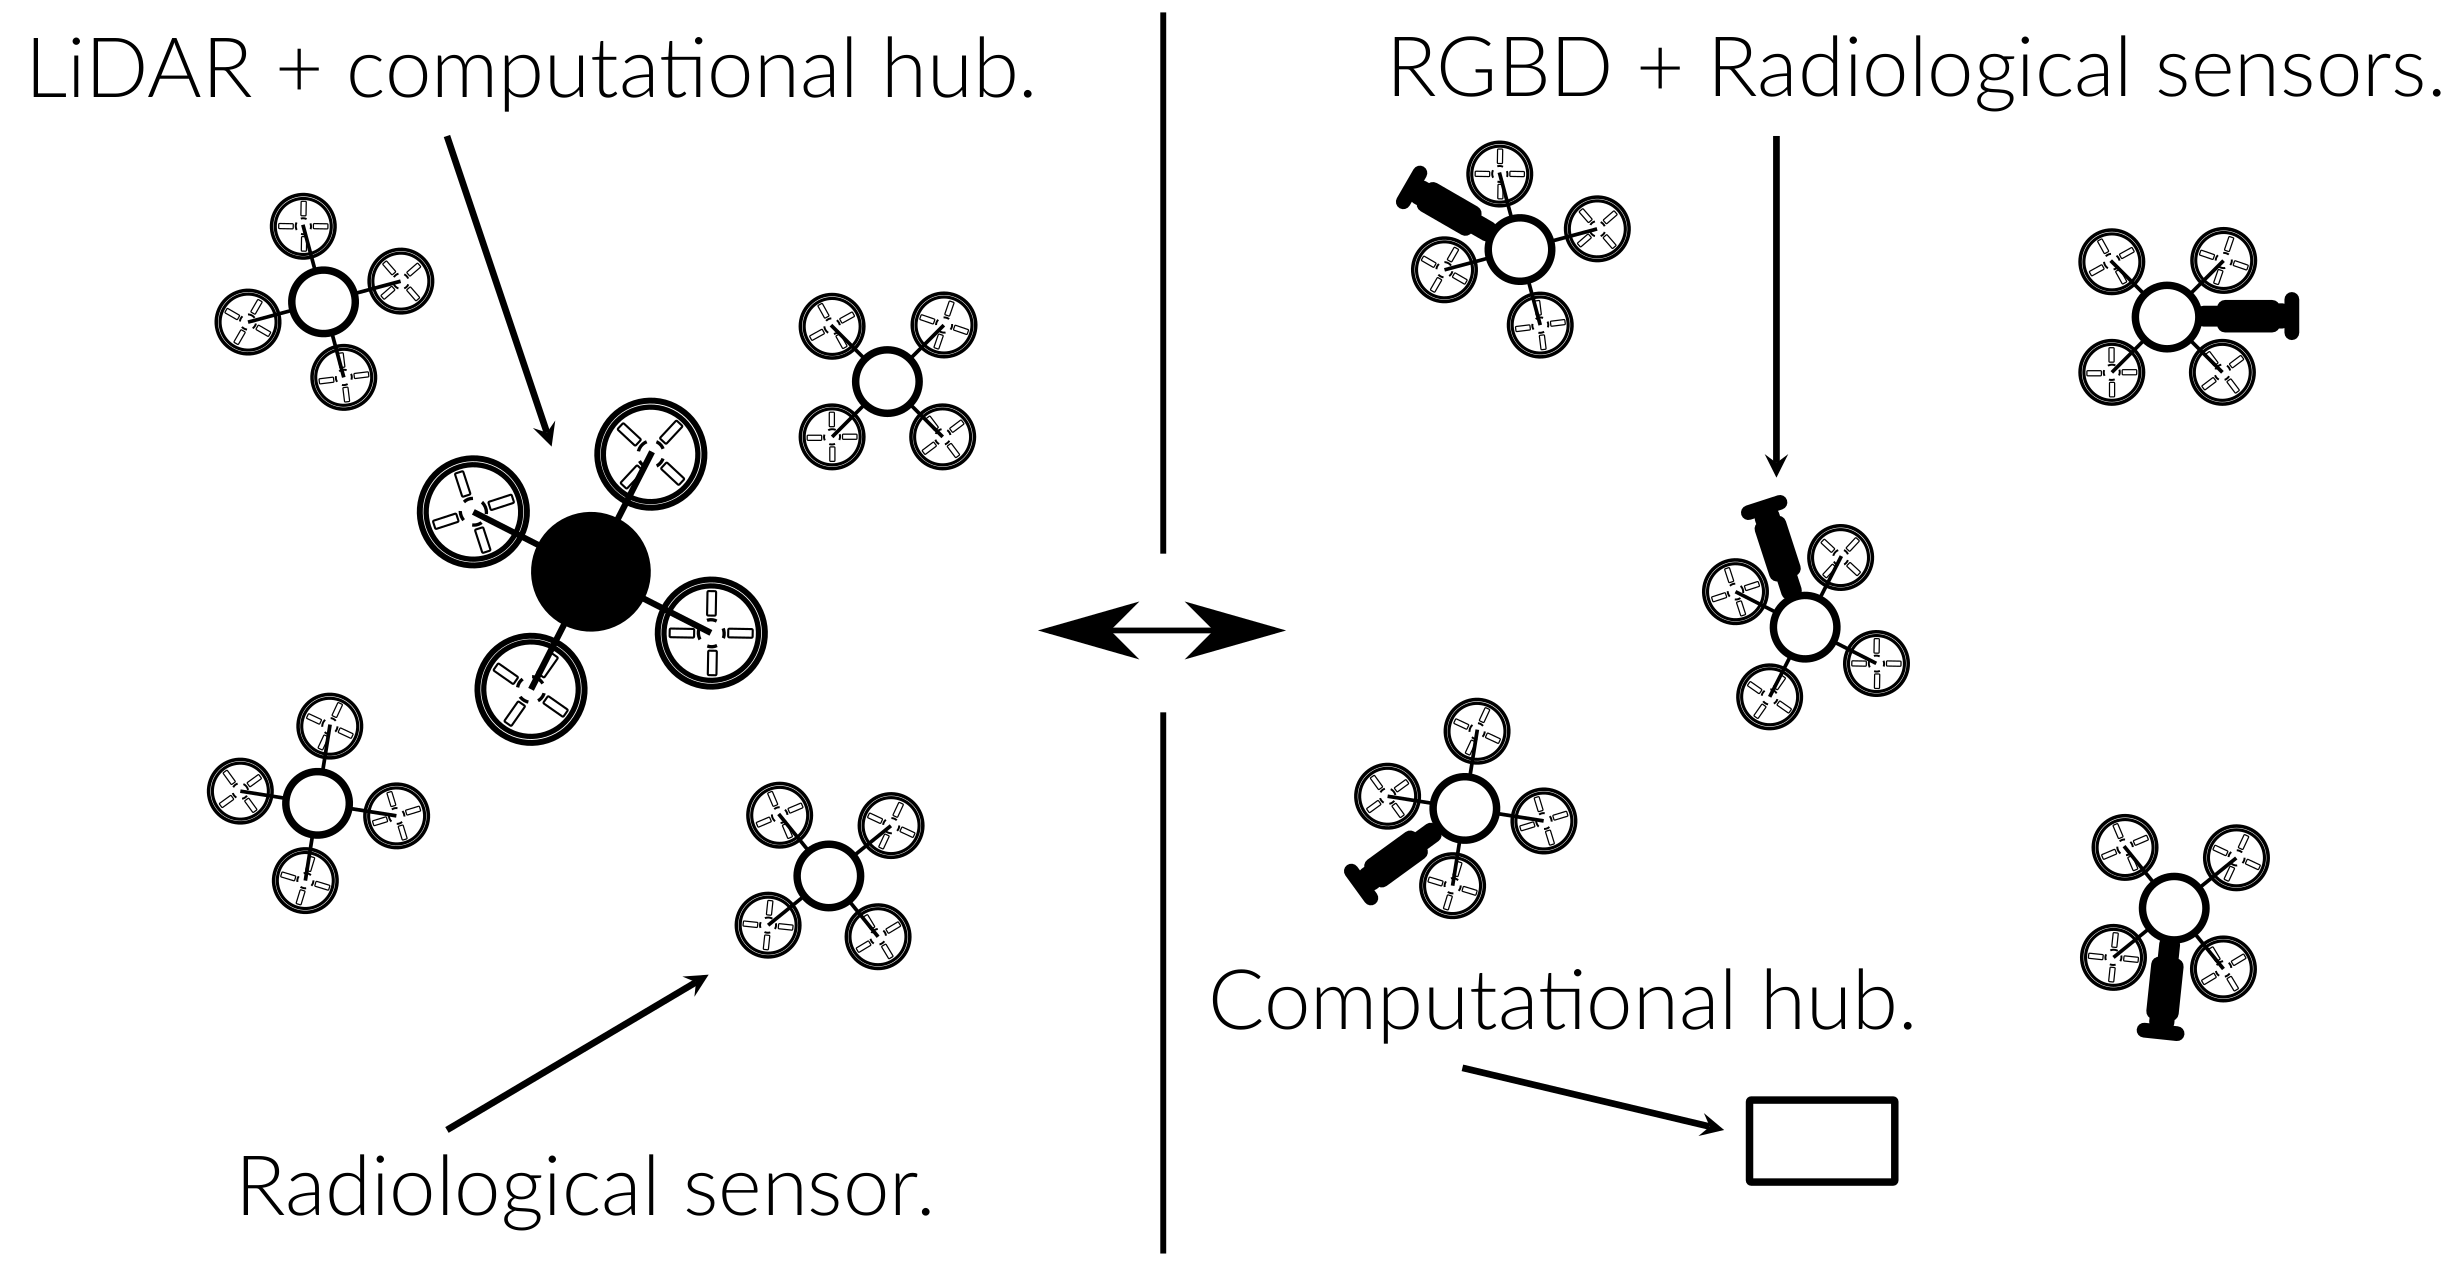 Possible multi-agent mapping architectures. Left: Larger UAV generates 3D maps with LiDAR and several smaller UAVs exclusively relay radiological sensing data to the central drone. Right: several smaller drones equipped with radiological and/or RGBD sensors communicate with a central (grounded) server.